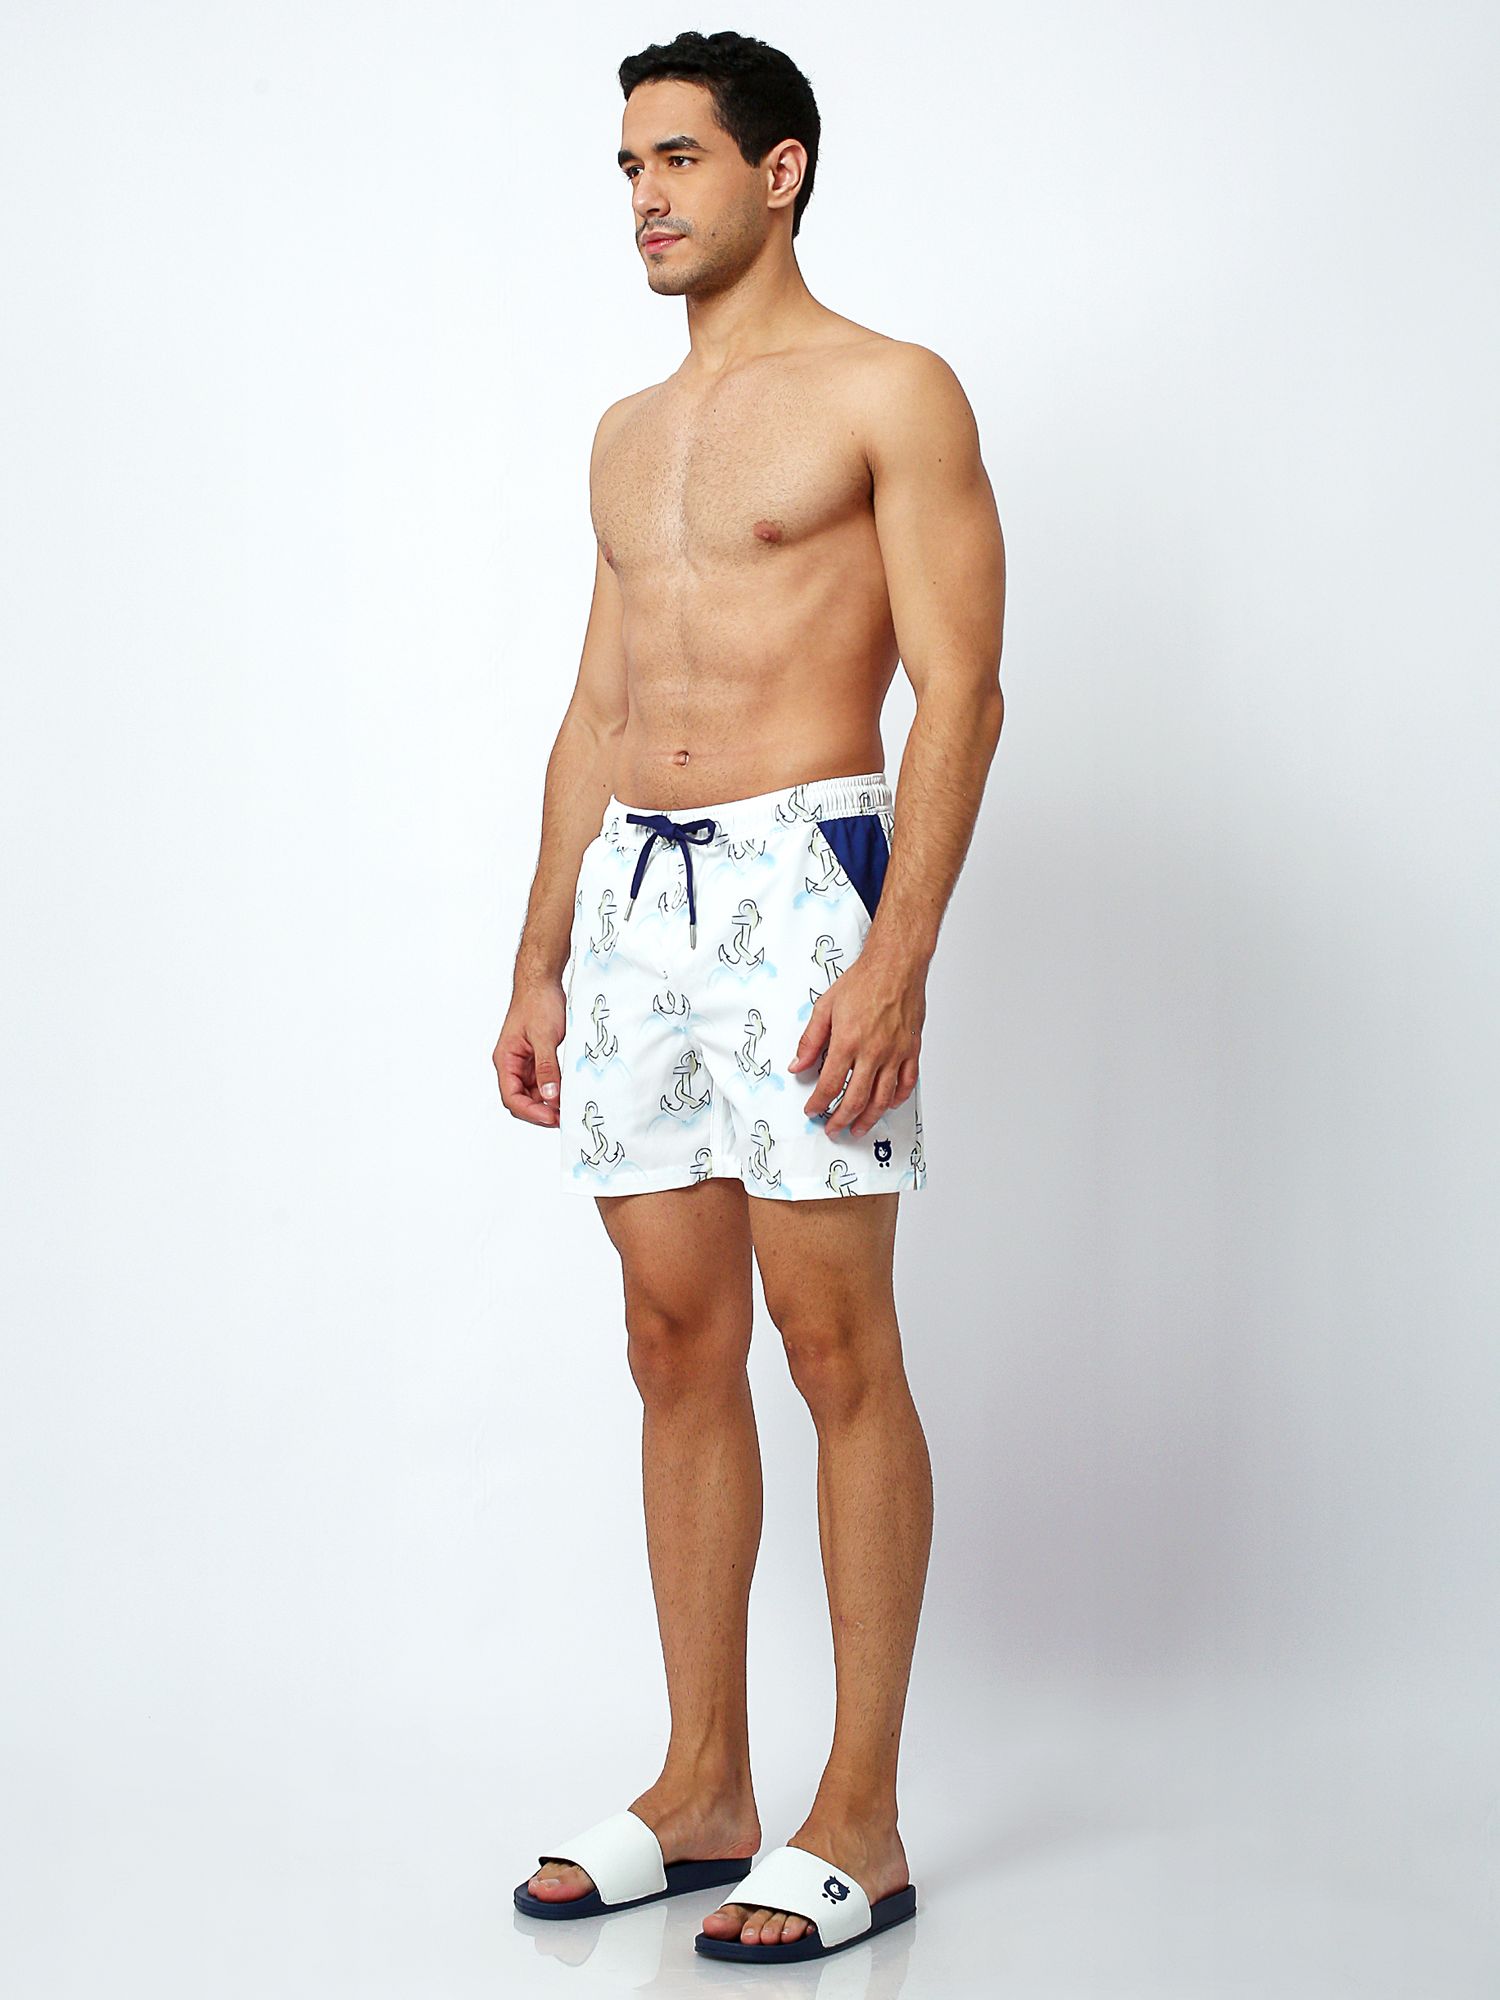 Buy Randy Cow Anchor Swim Shorts with Waterproof Pocket, White Online at johnlewis.com